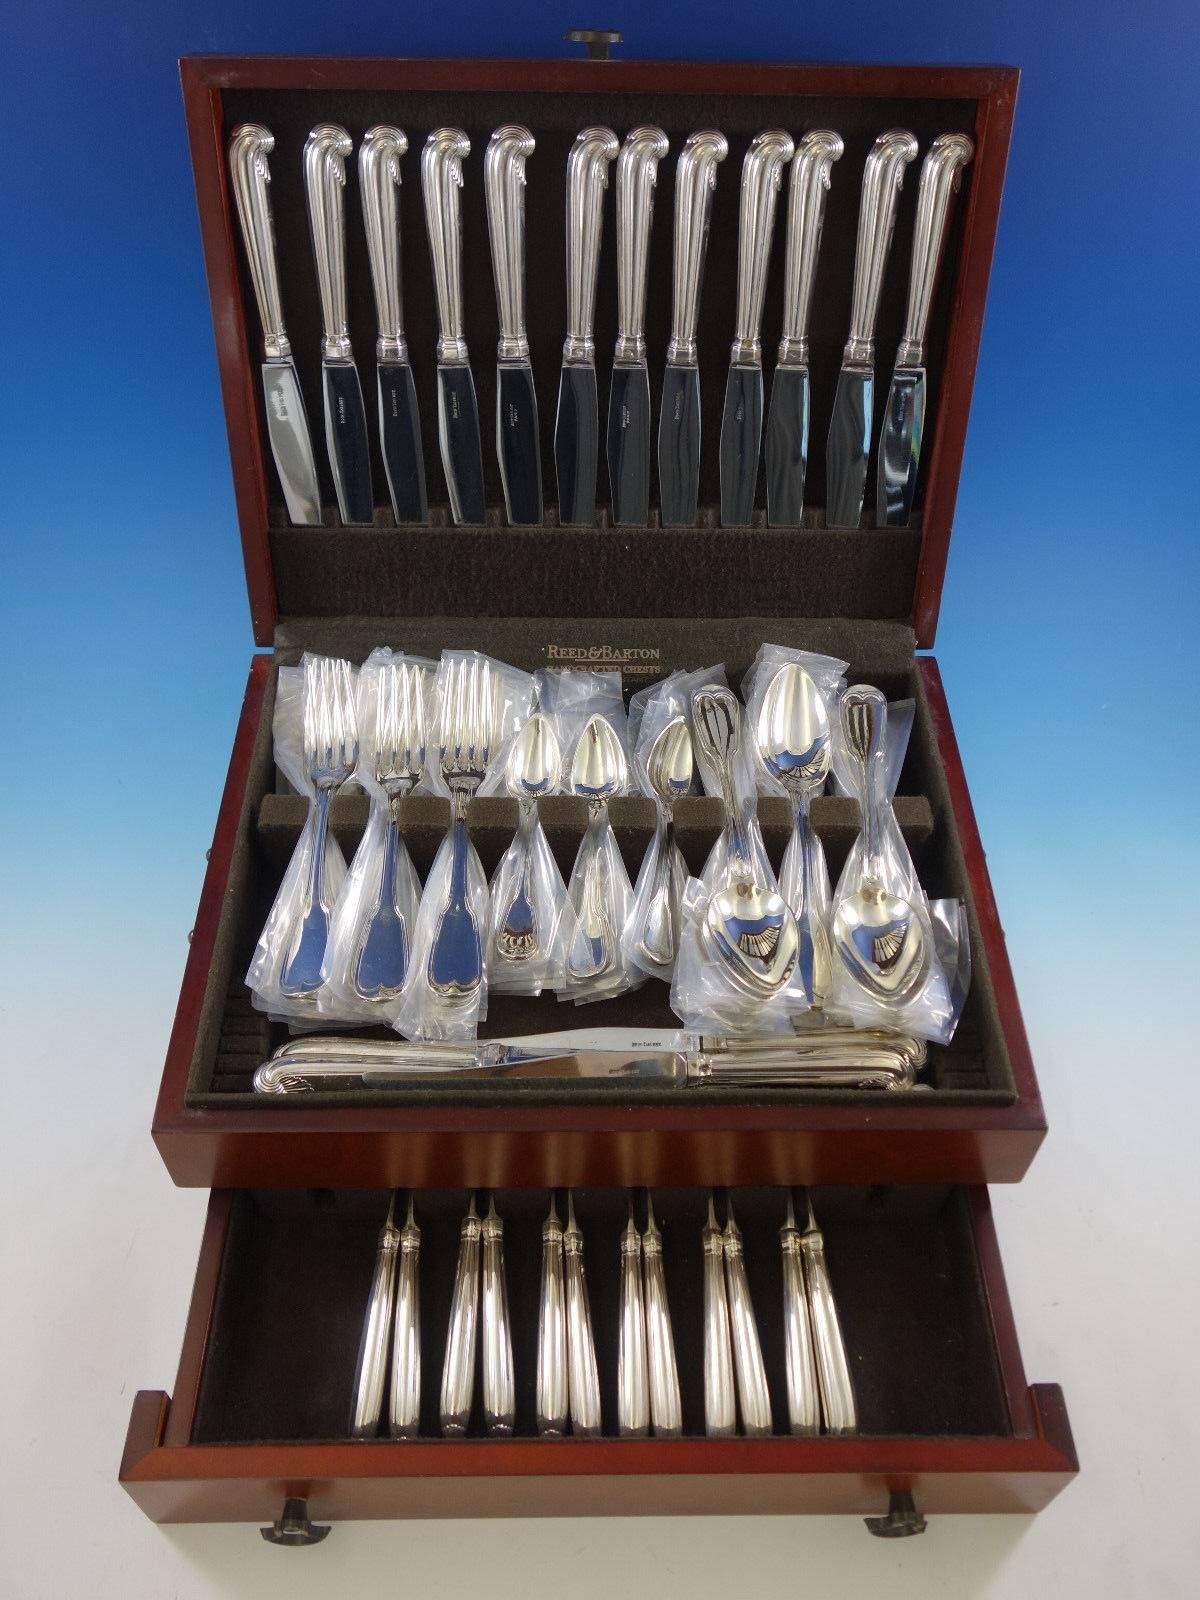 Coquille by Puiforcat 950 sterling silver flatware and unknown maker French sterling set of 78 pieces. This set includes: 

18 dinner size knives, pistol grip, 9 7/8